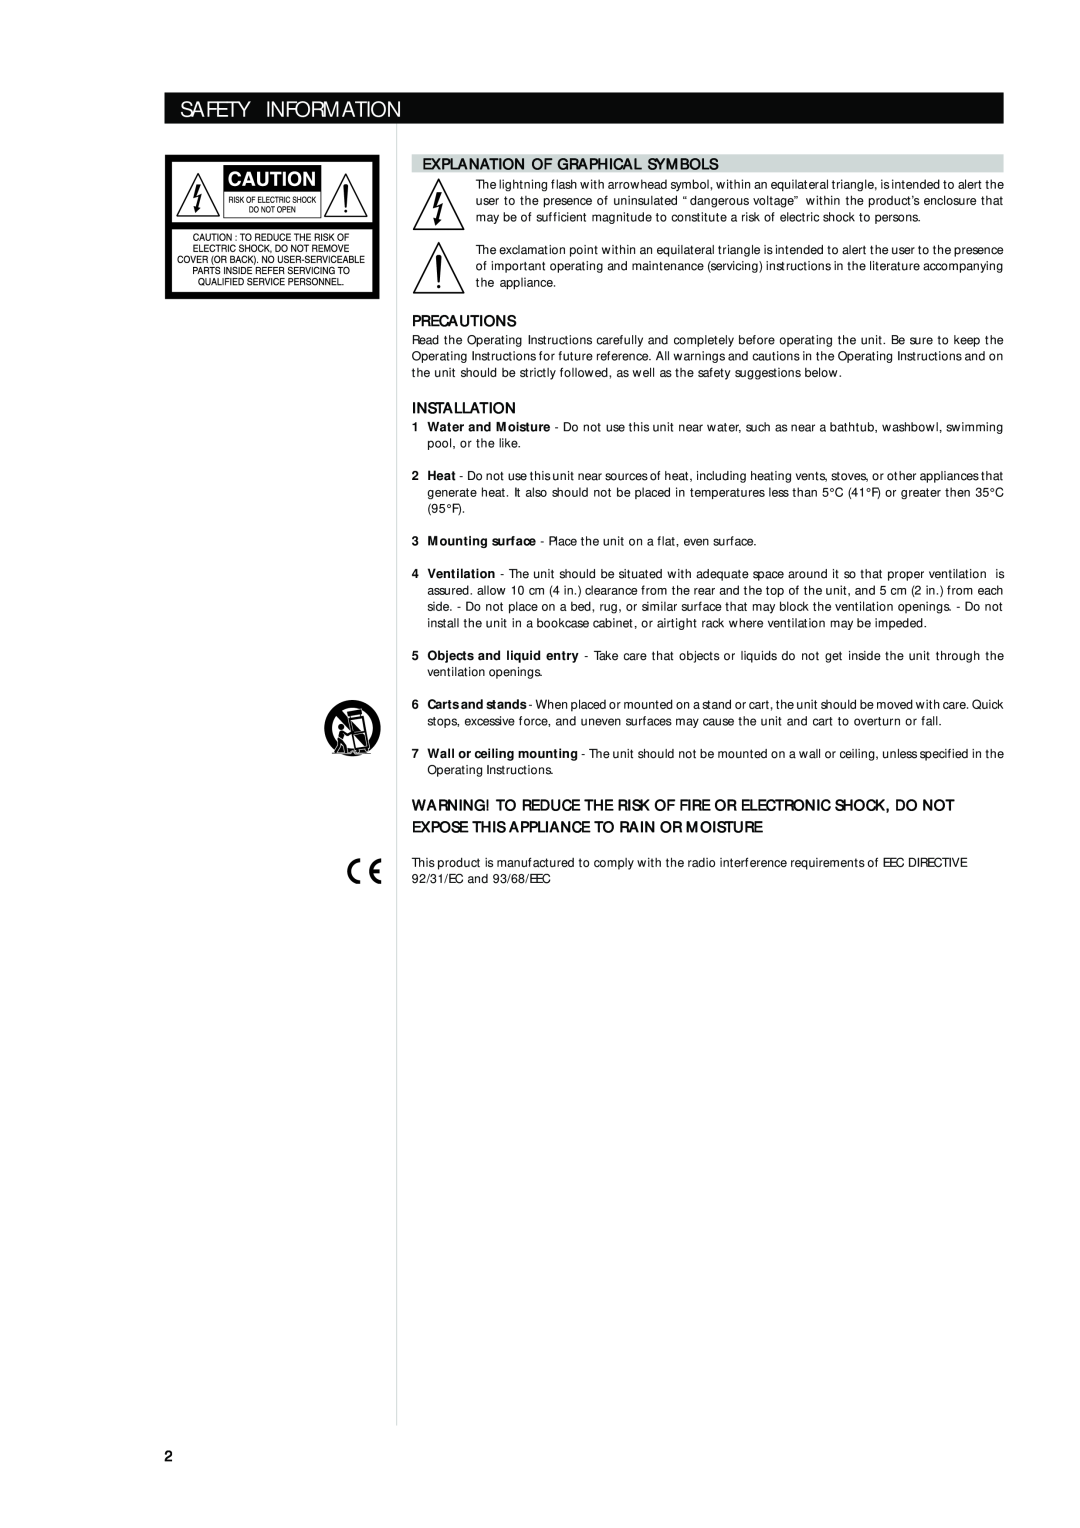 NAD T752 owner manual Safety Information, Explanation Of Graphical Symbols, Precautions, Installation 